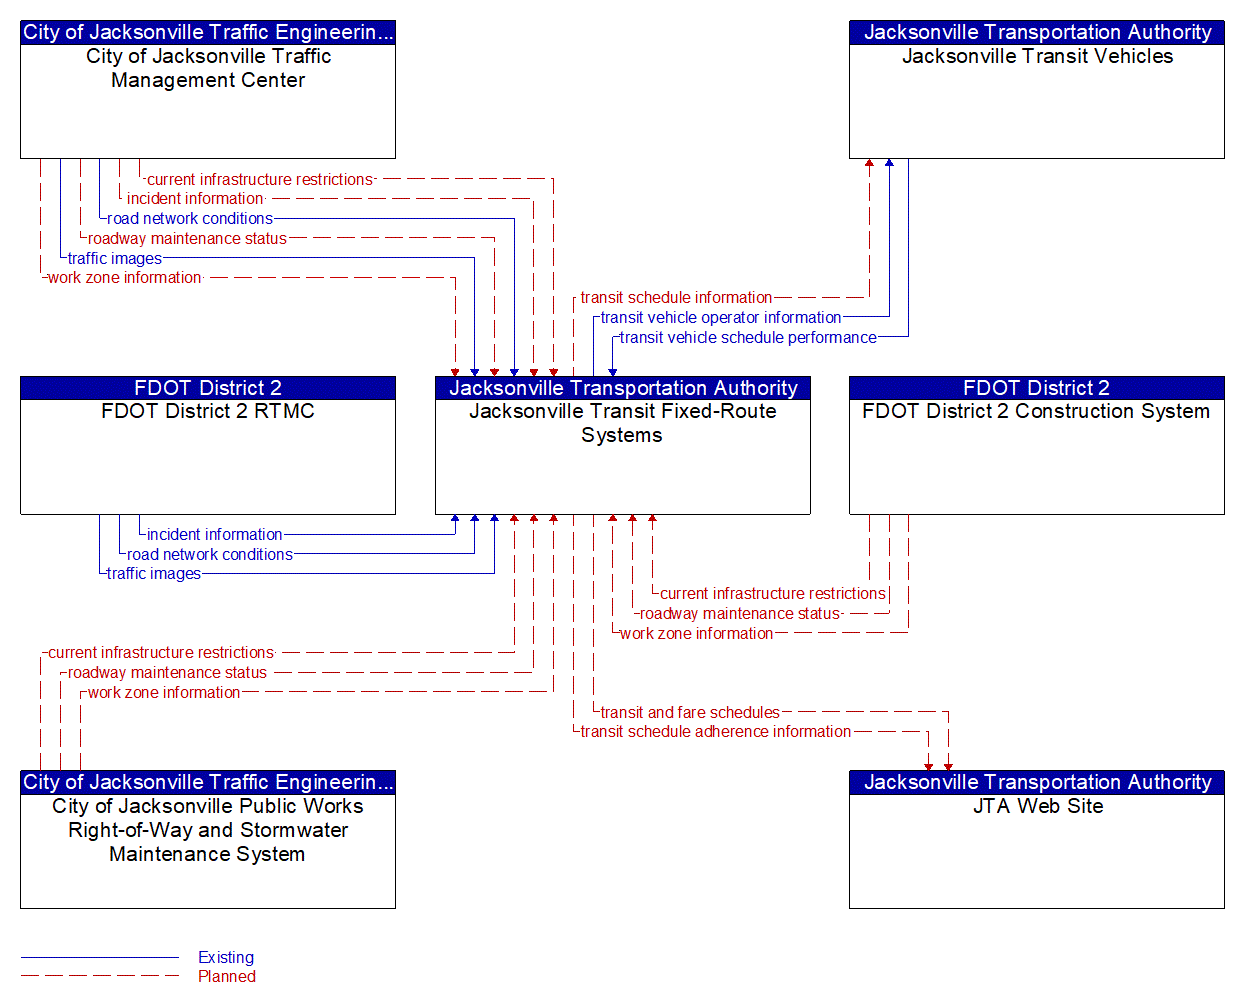 Service Graphic: Transit Fixed-Route Operations (JTA Fixed Route)